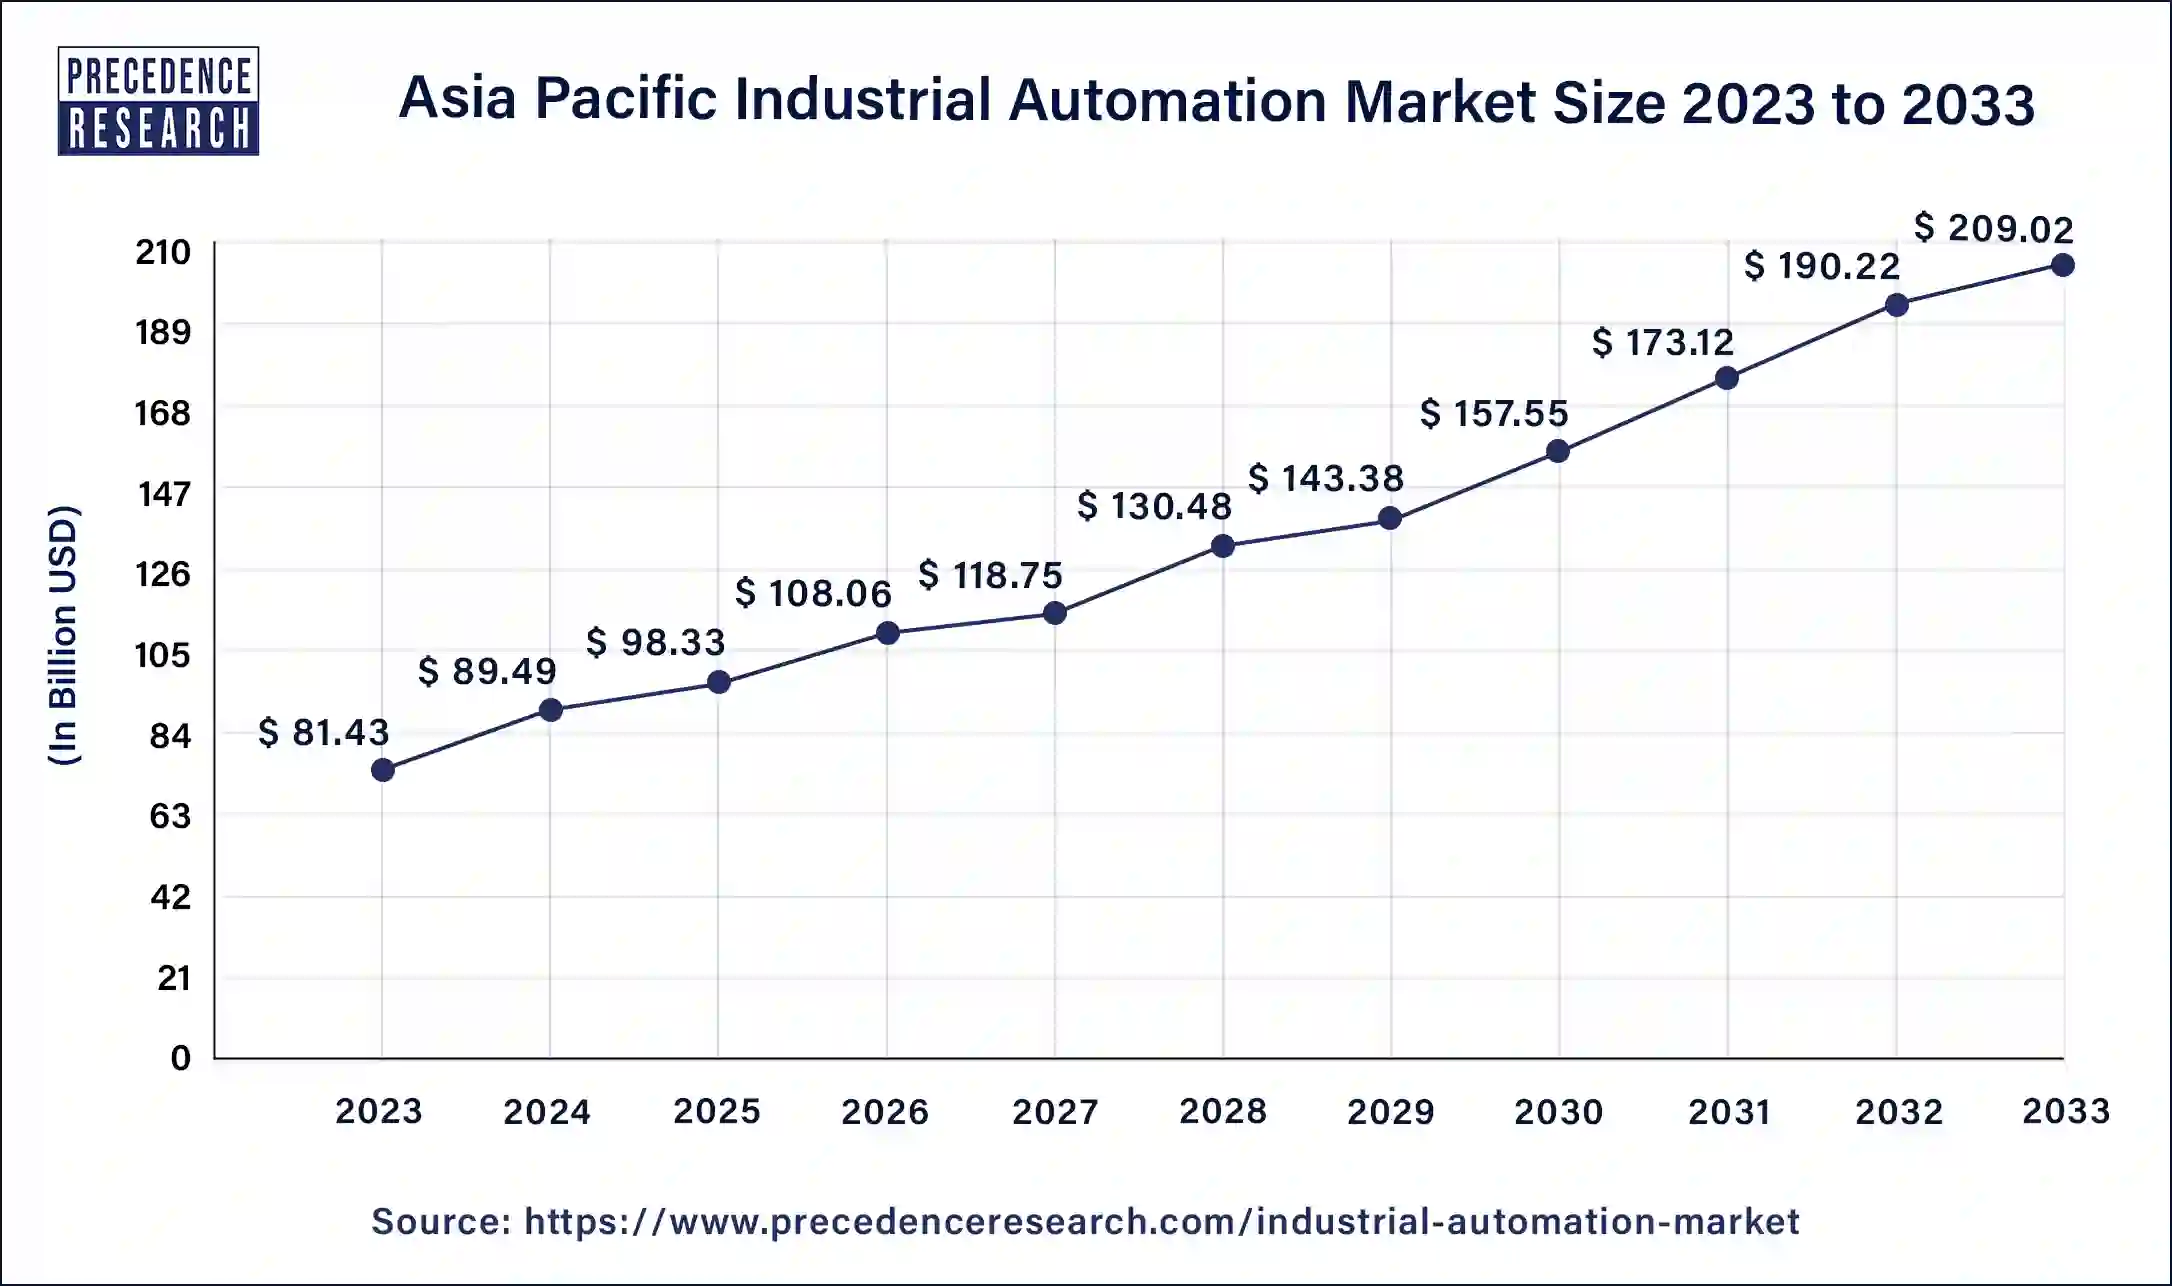 Asia Pacific Industrial Automation Market Size 2024 to 2033